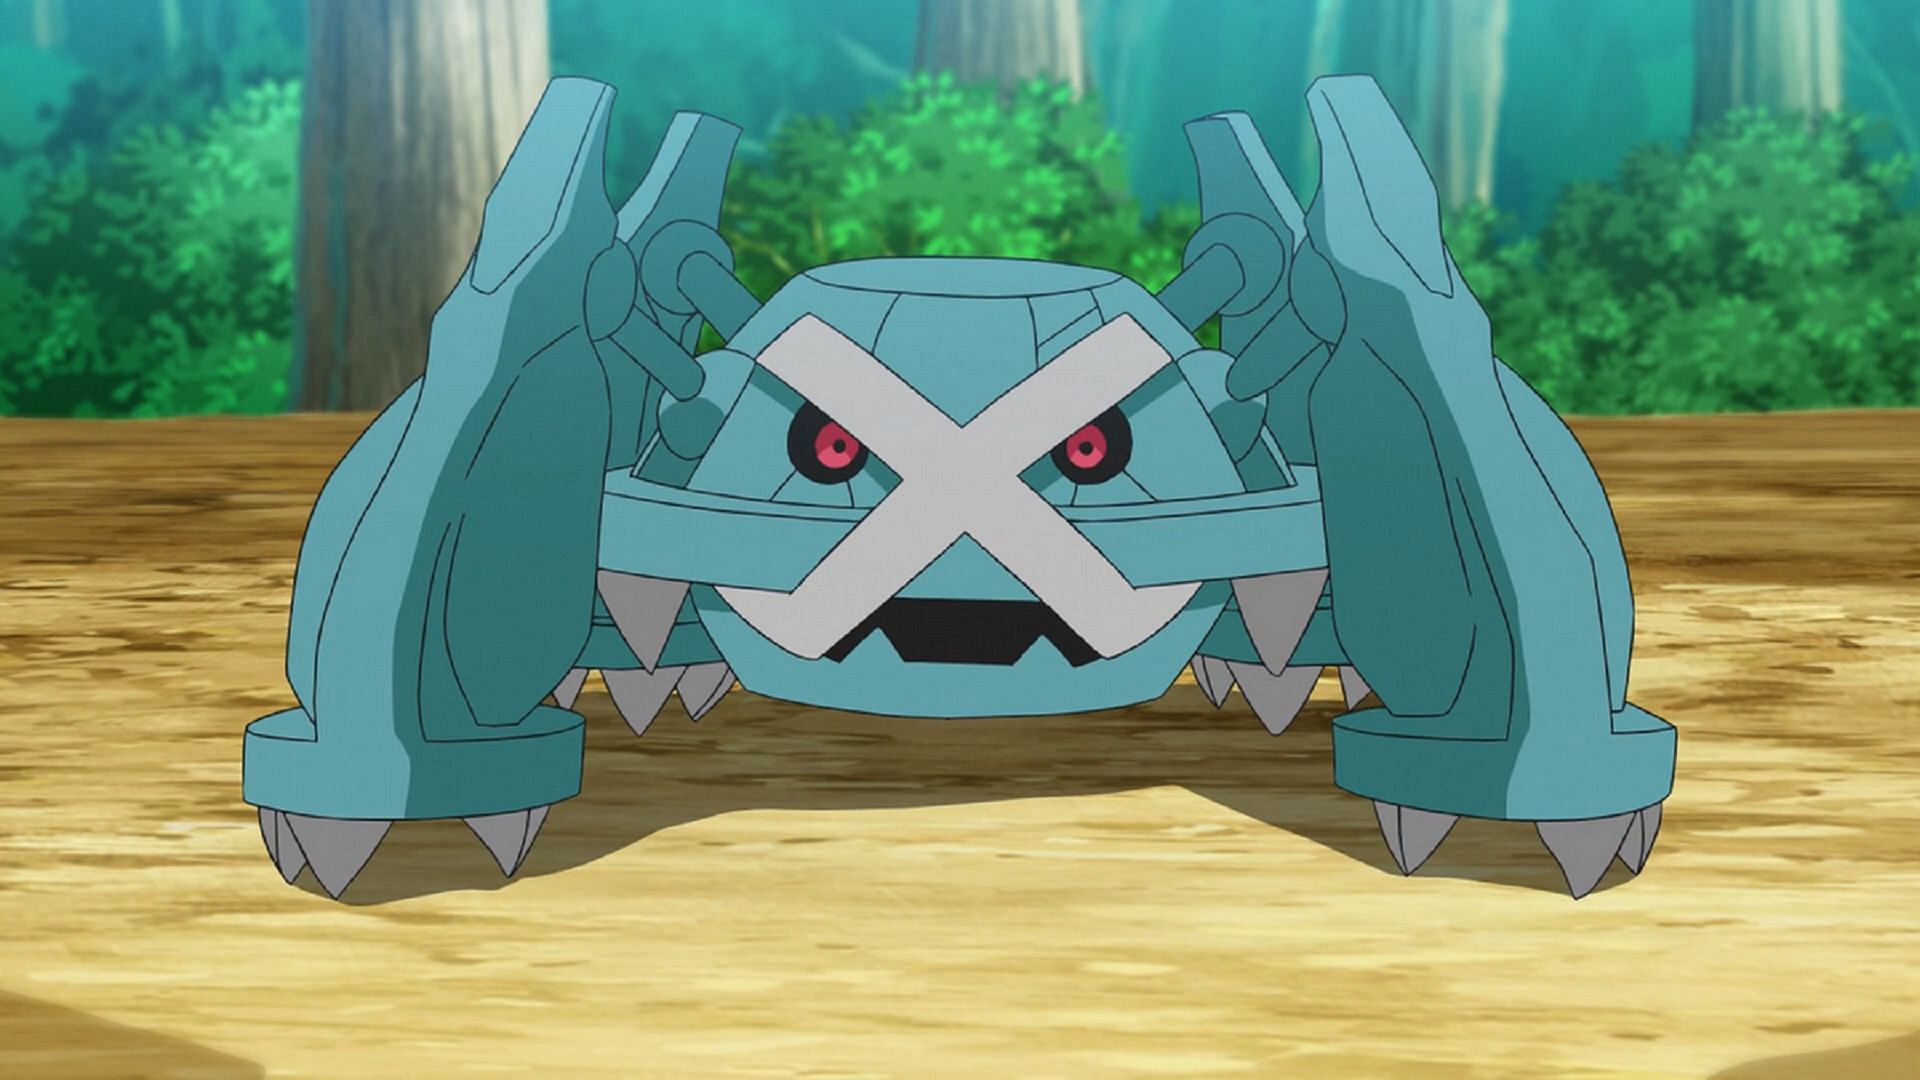 Steel-types like Metagross are excellent Florges counters in Pokemon GO (Image via The Pokemon Company)